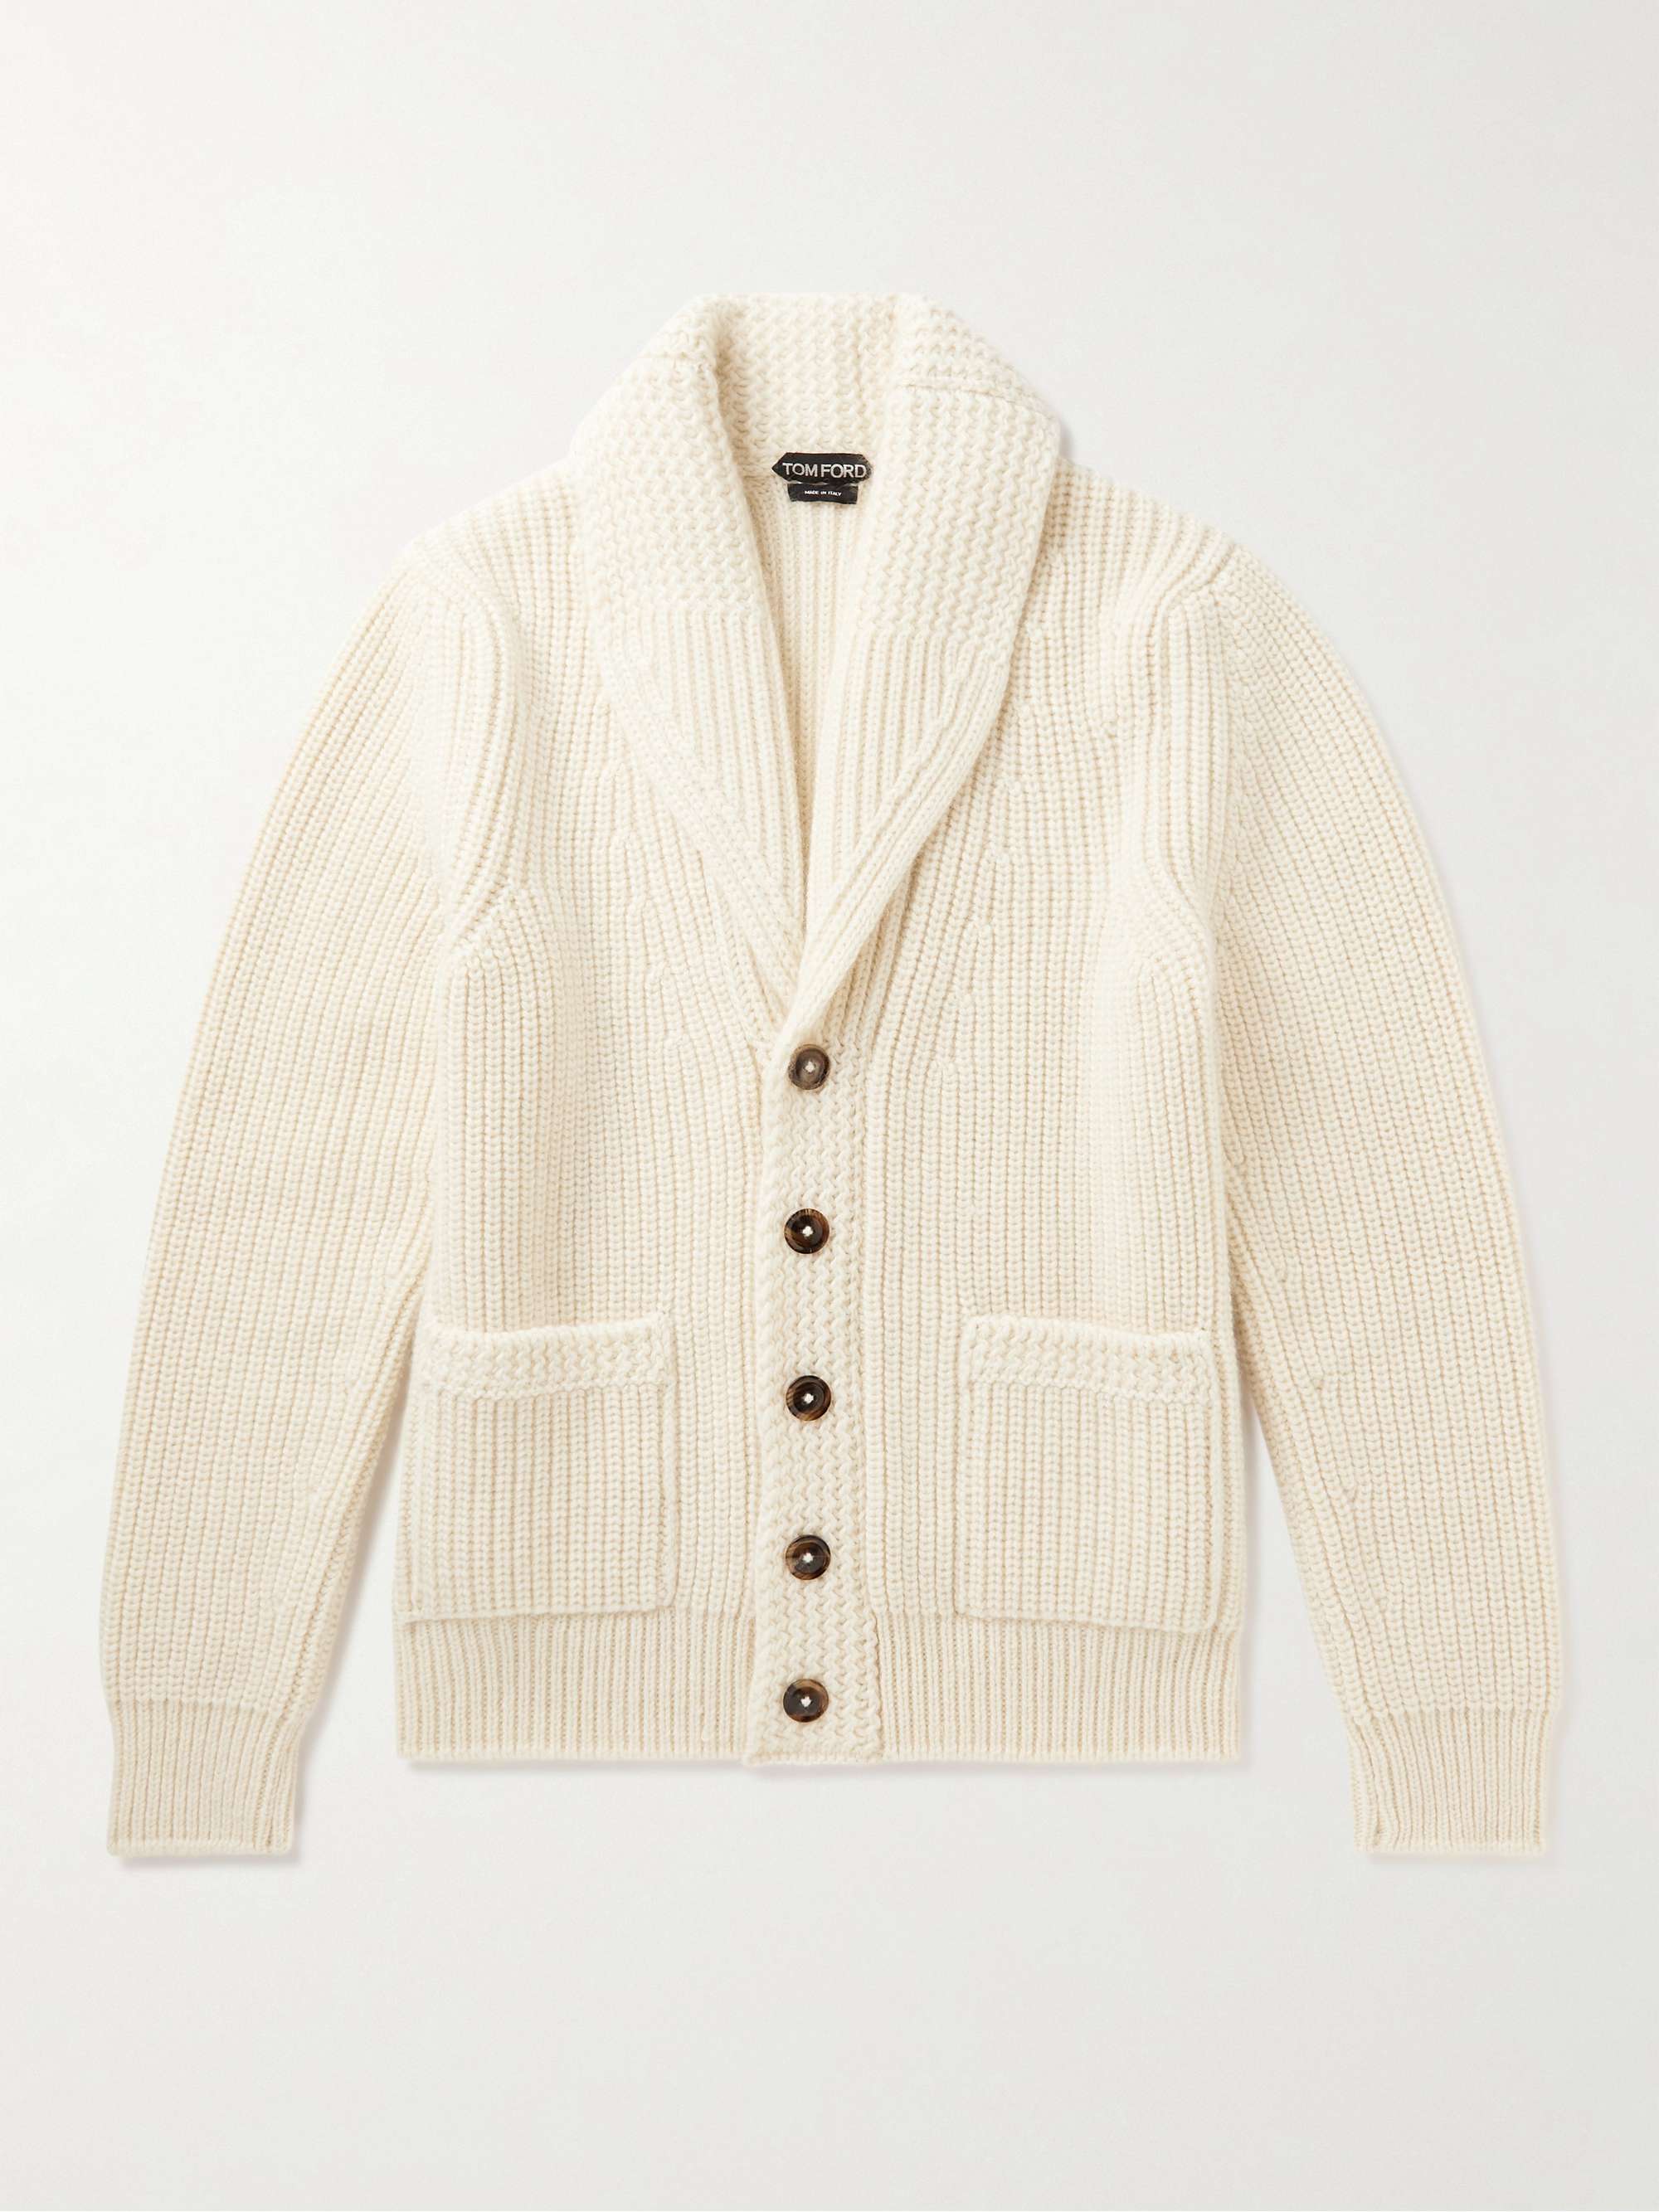 TOM FORD Shawl Collar Cashmere and Mohair Blend Cardigan for Men